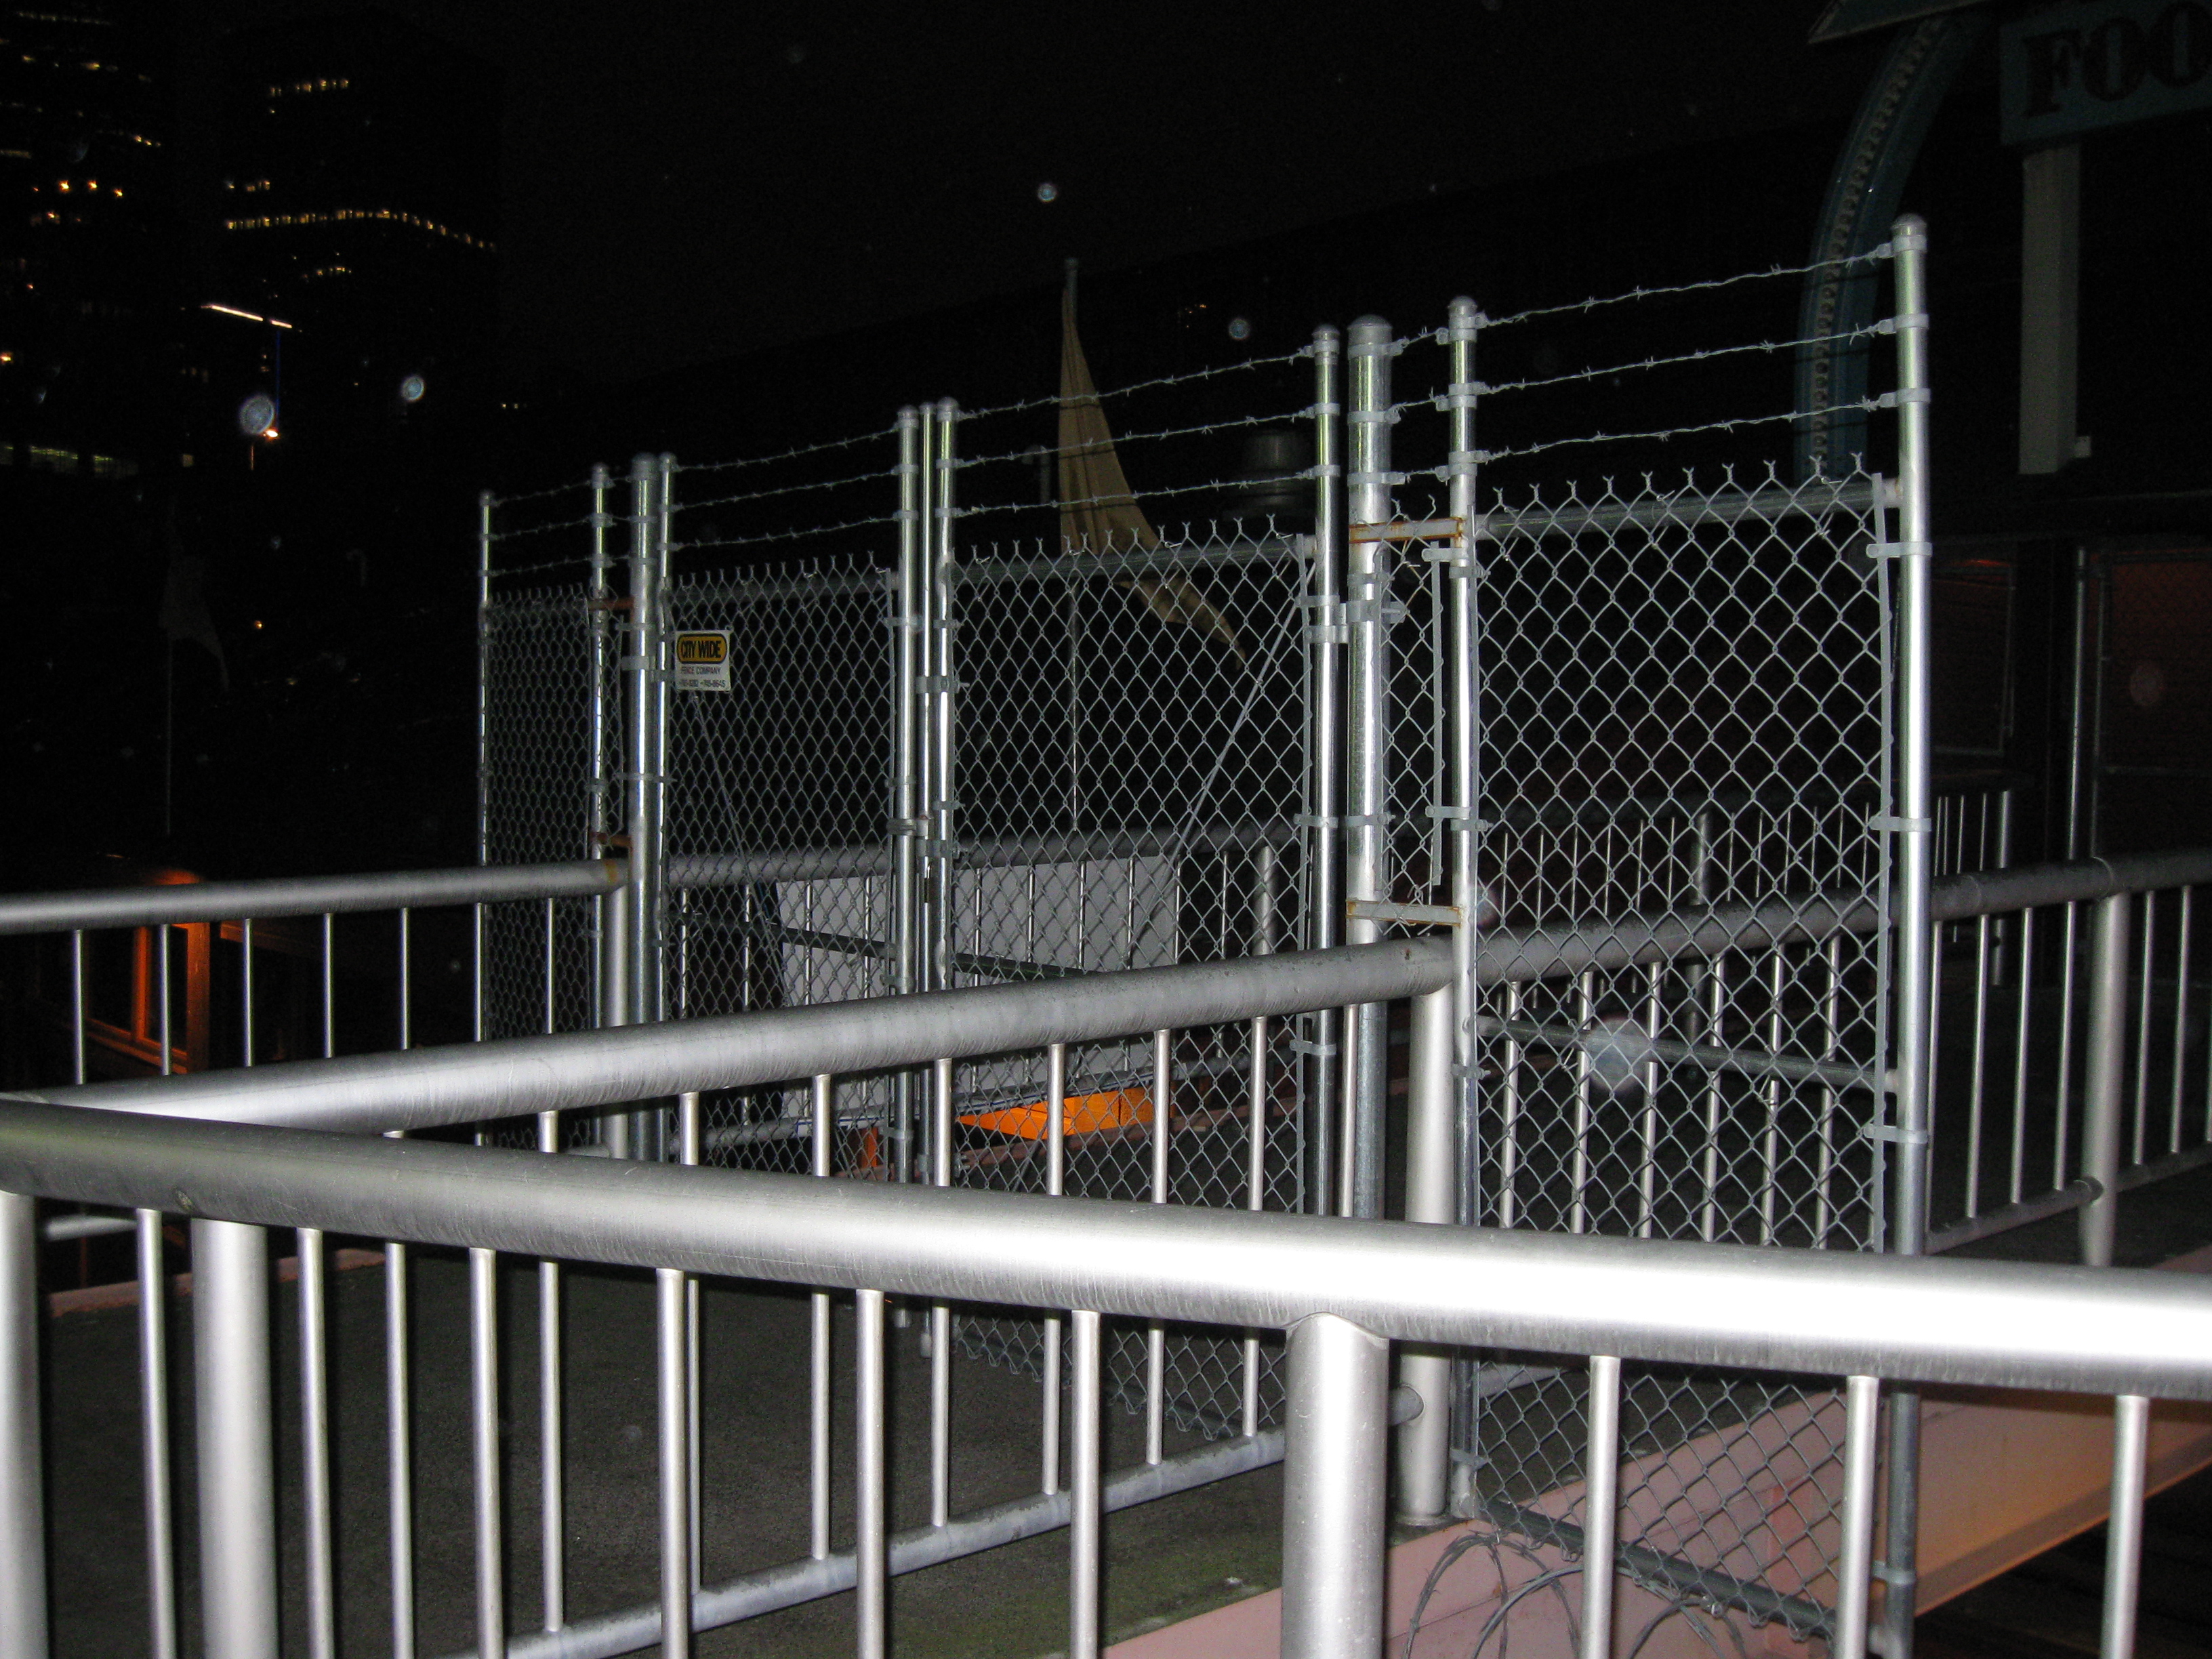 Fenced off food court at night 2, Lines, HQ Photo